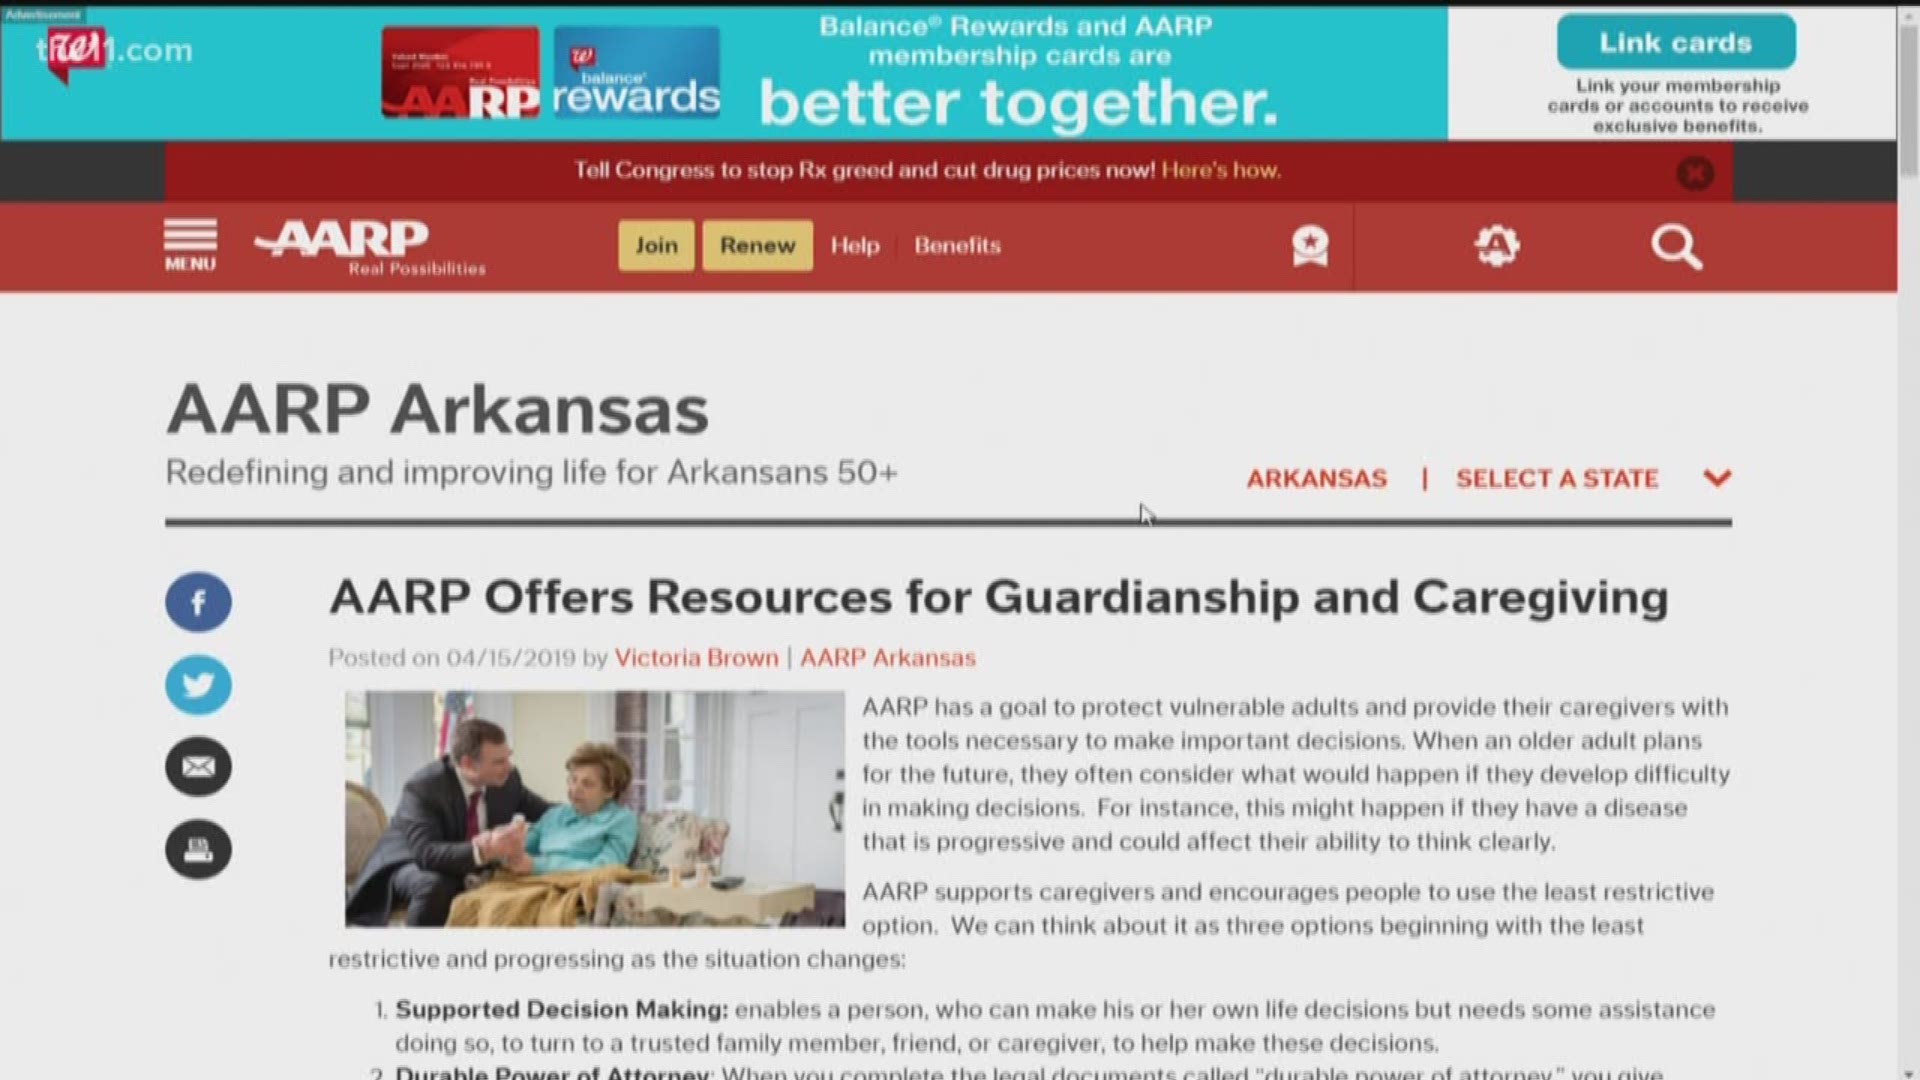 AARP has resources and tools that you need to prepare your family for caregiving or guardianship of a loved one.